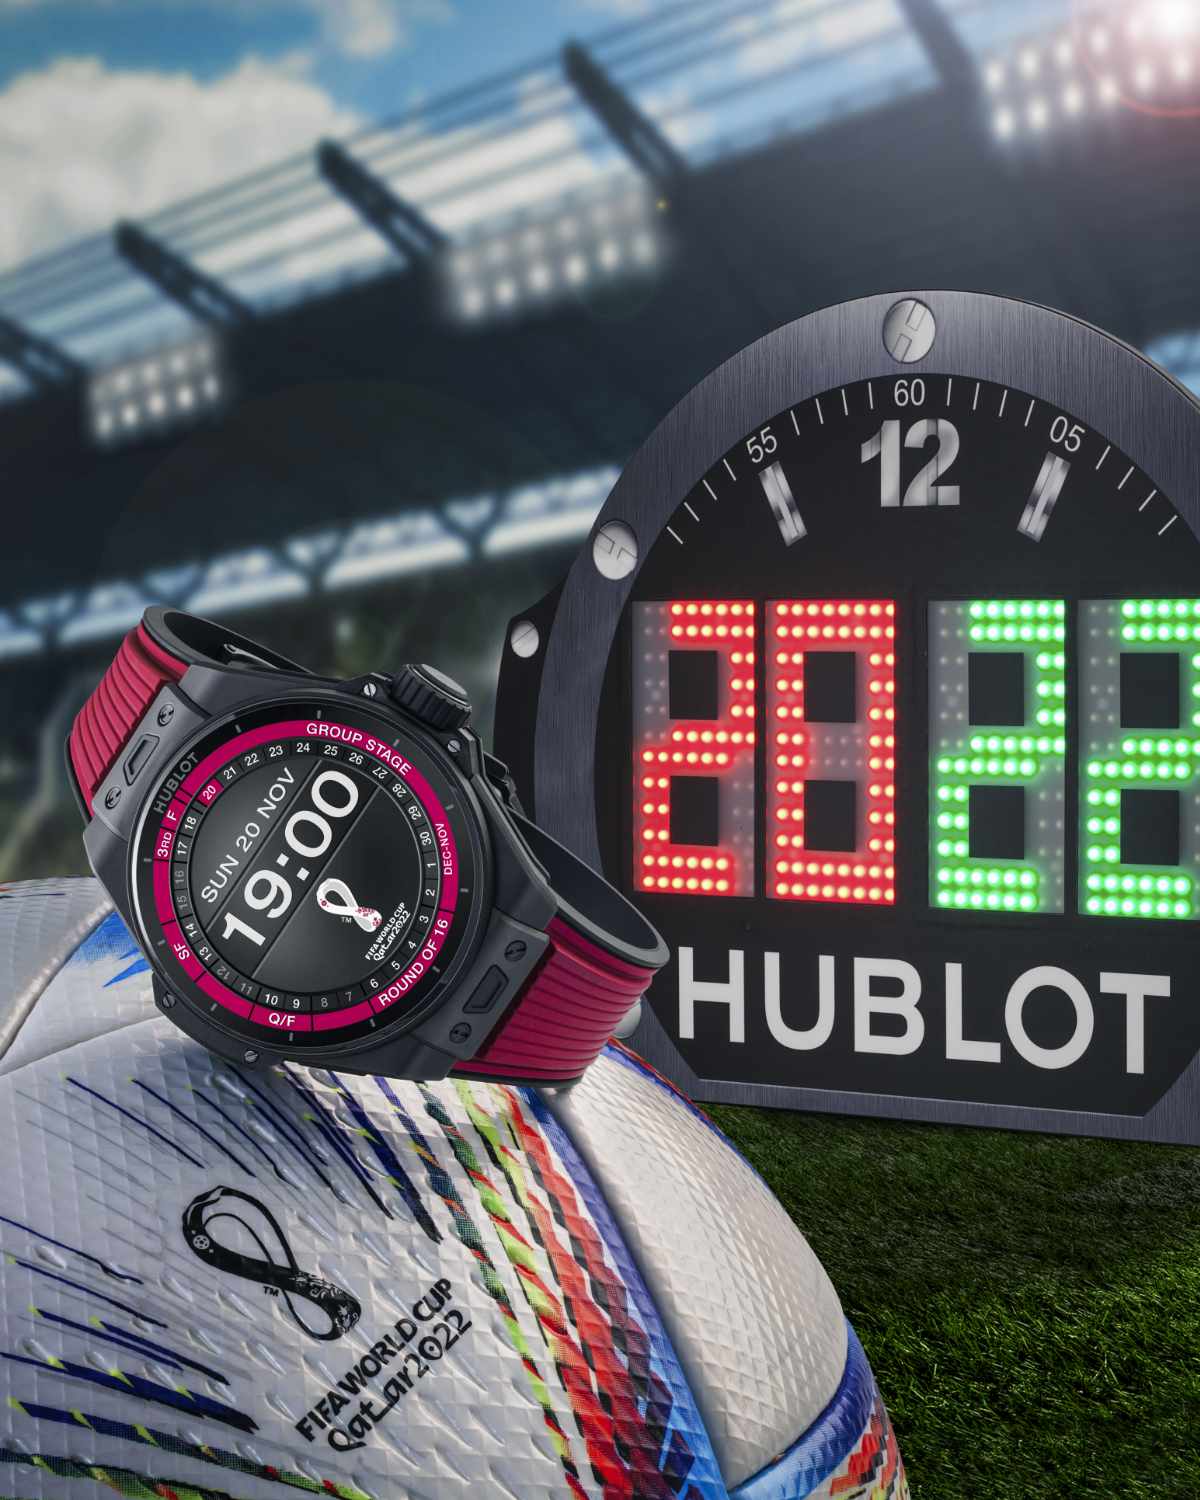 Meet The First Hublot Connected Watch, Made With FIFA, Intel, Google